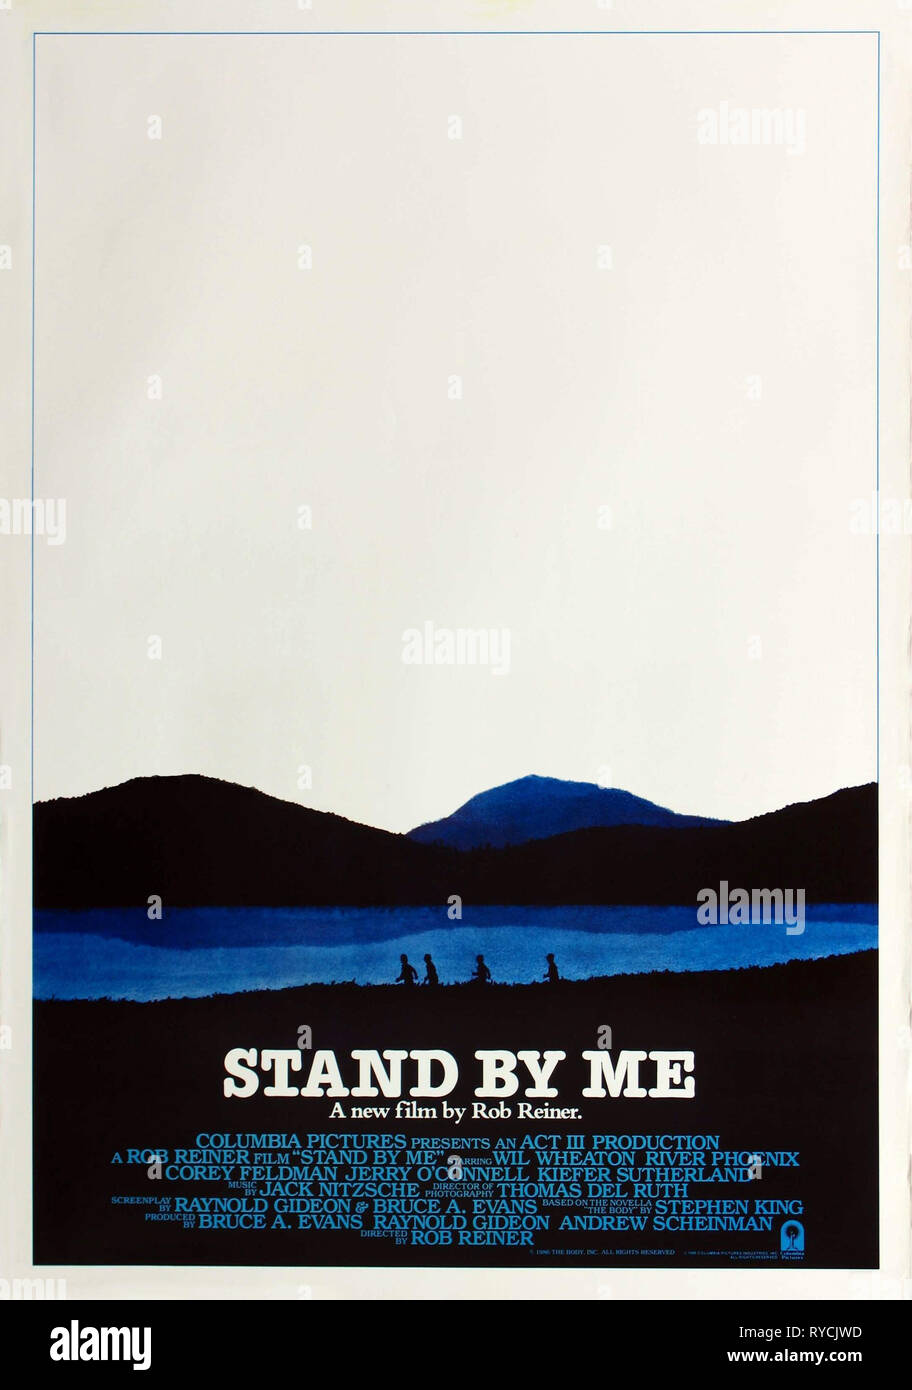 MOVIE POSTER, STAND BY ME, 1986 Stock Photo - Alamy